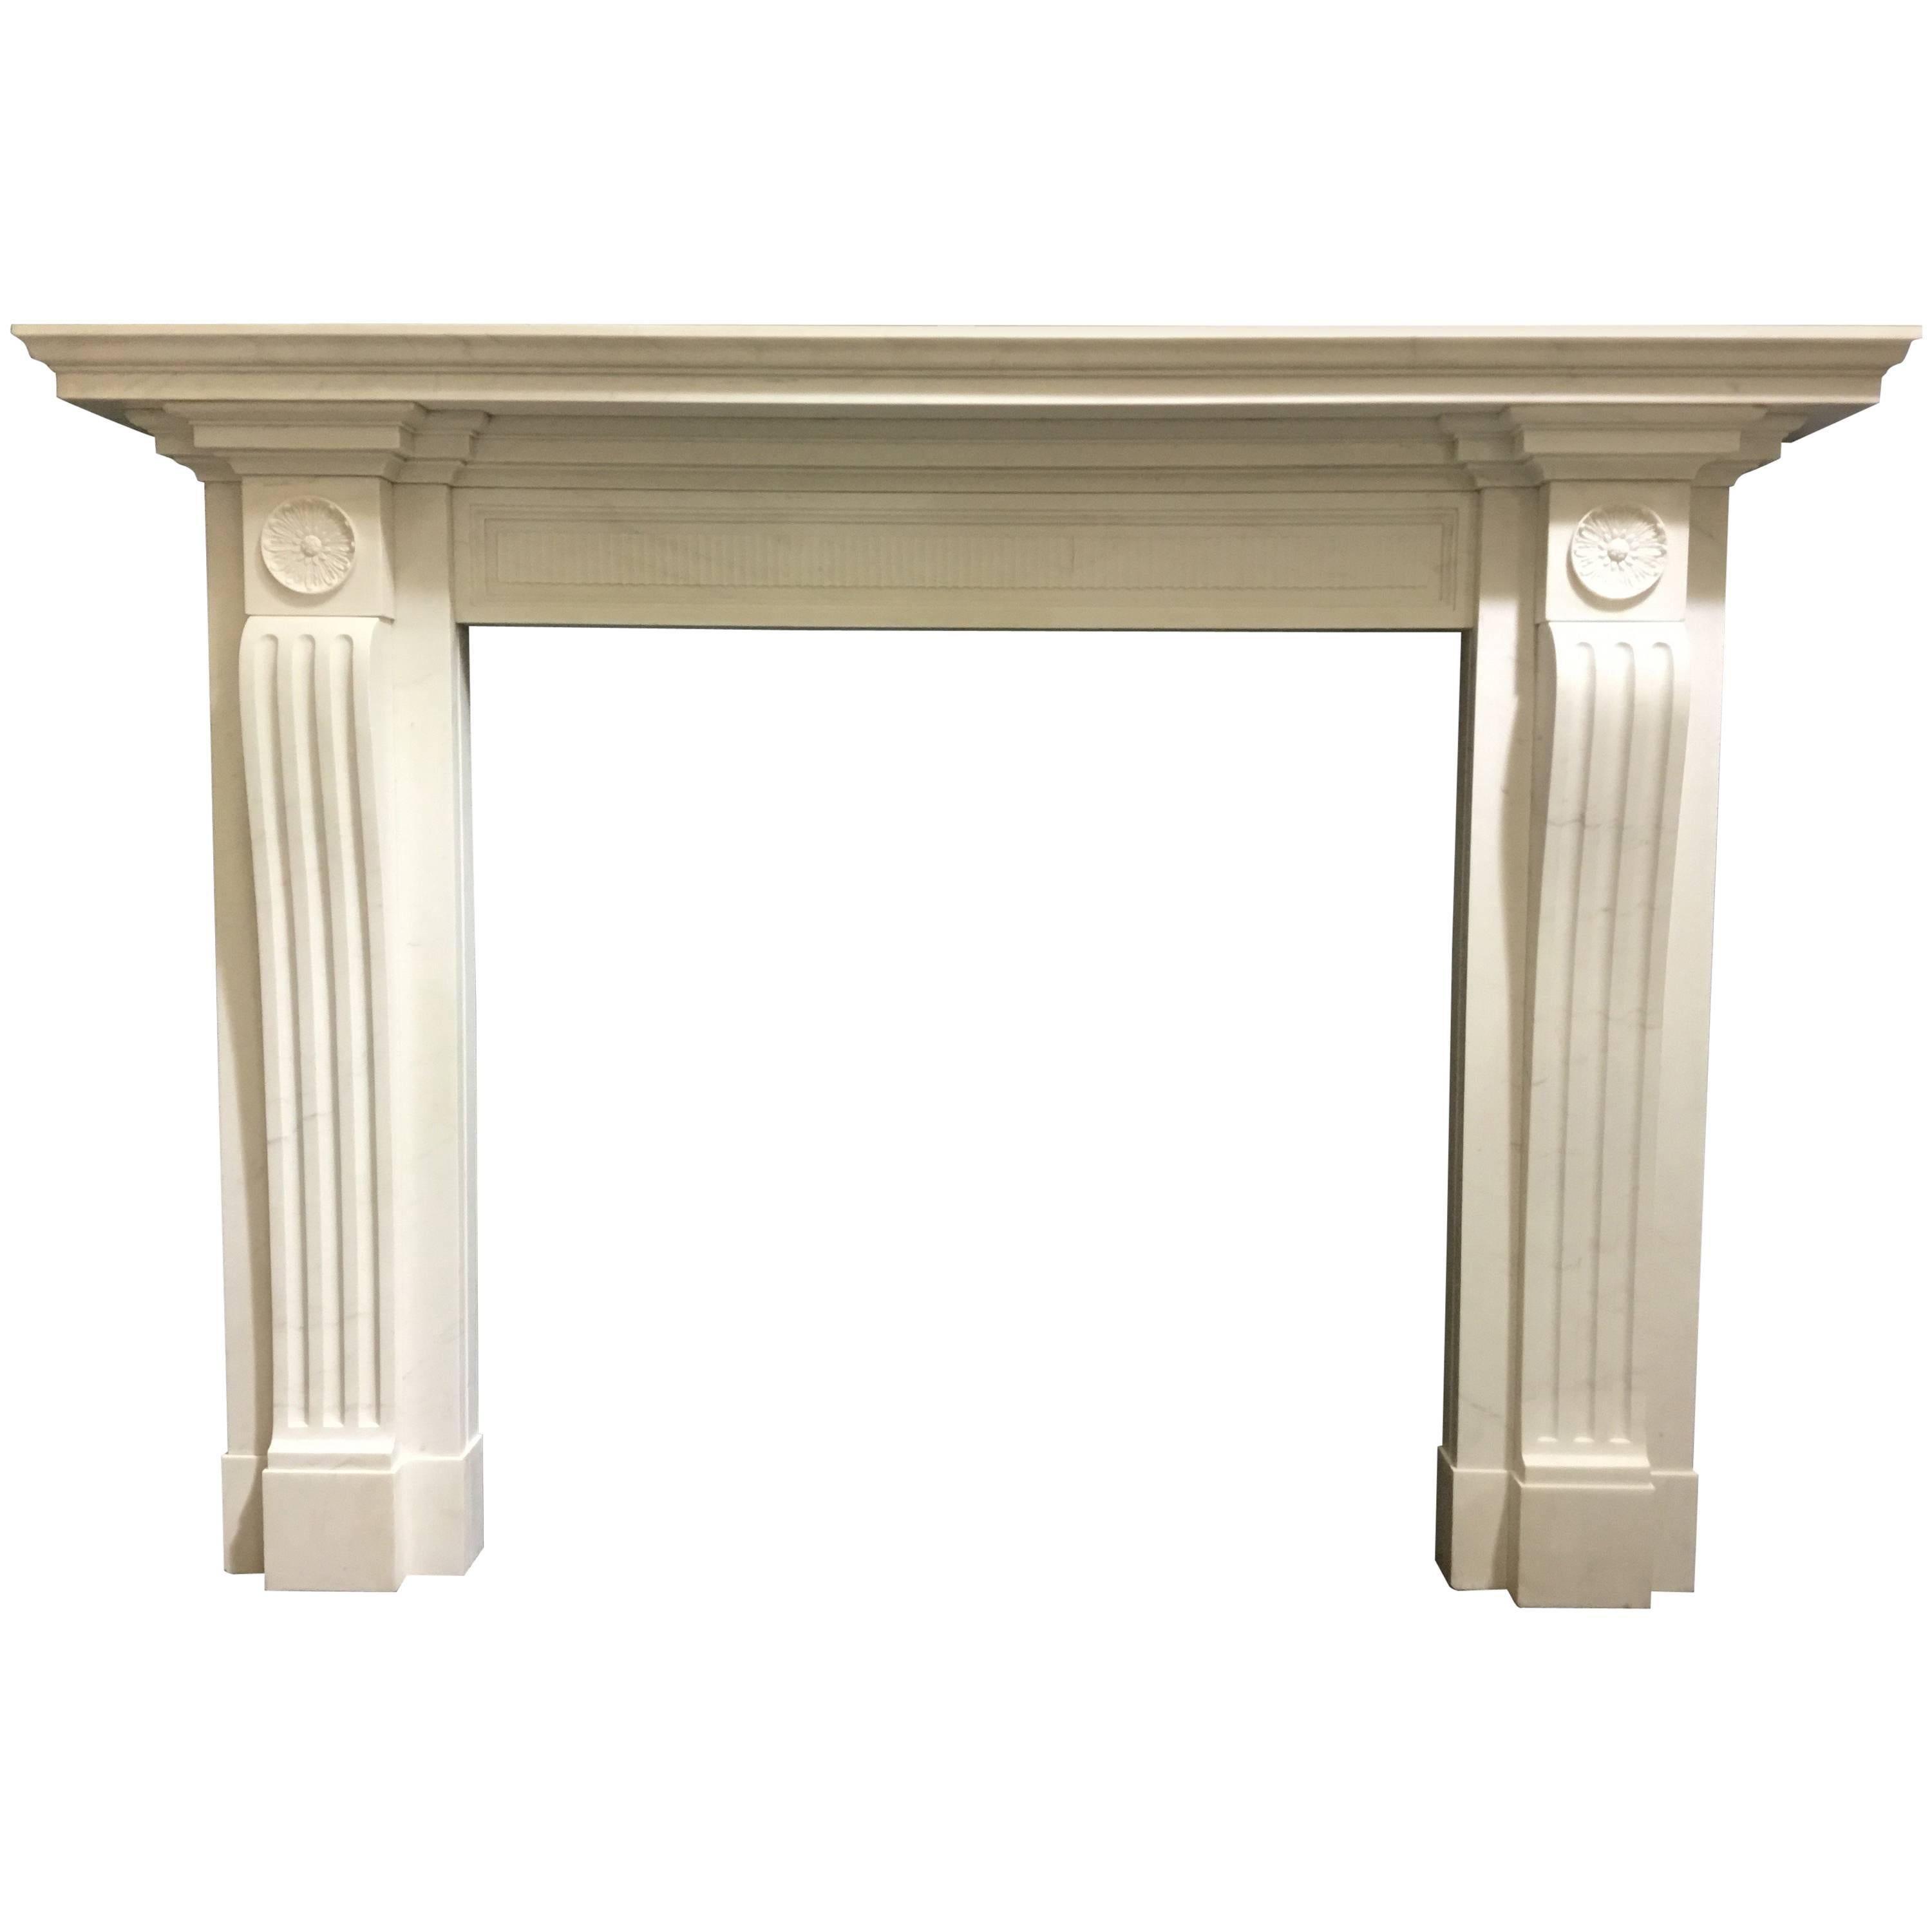 Neoclassical Fireplace Mantel in Marble